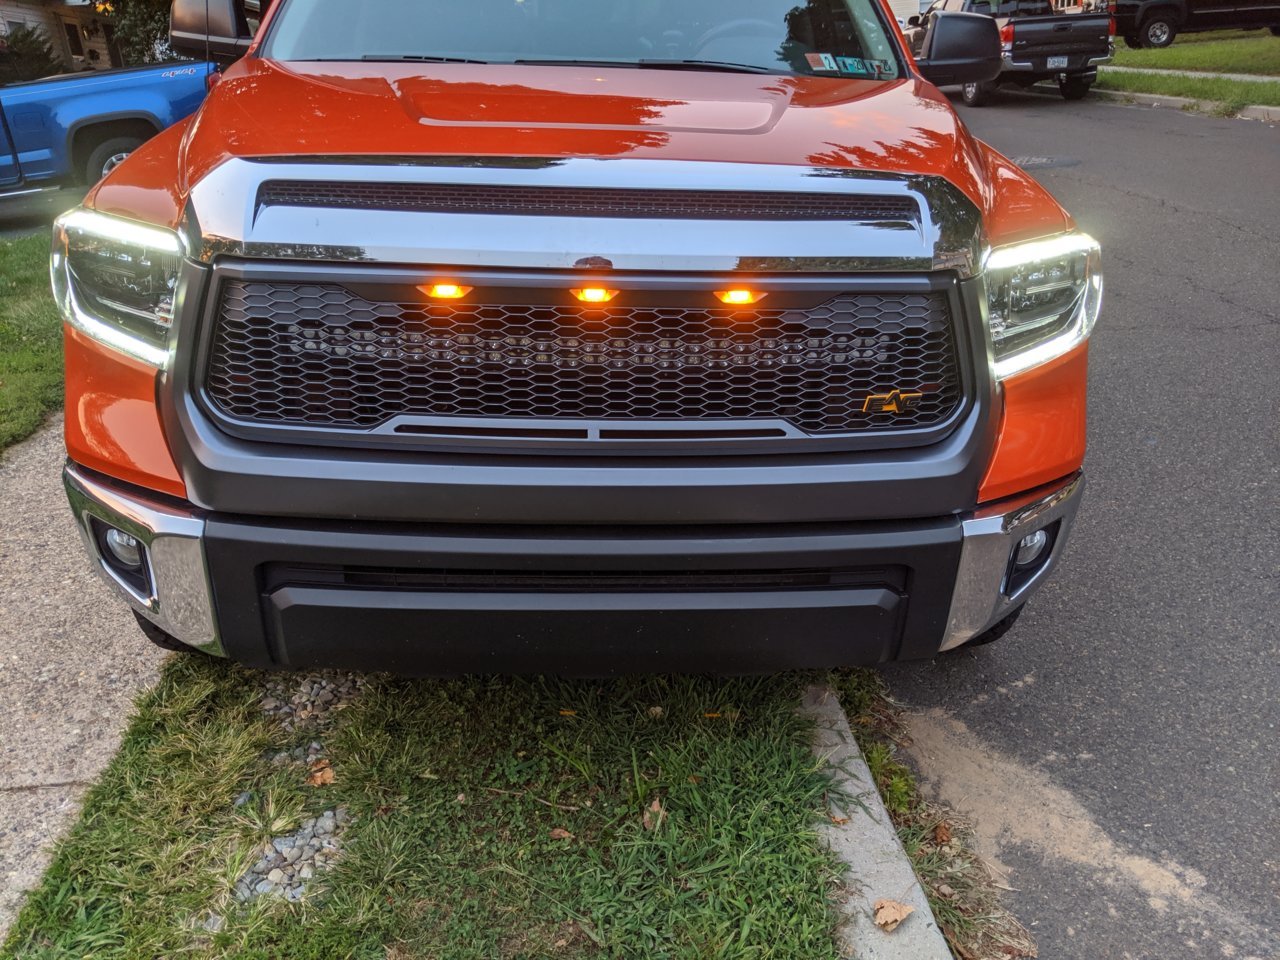 What's the best led light bar for front bumper of 2014-2019 tundras